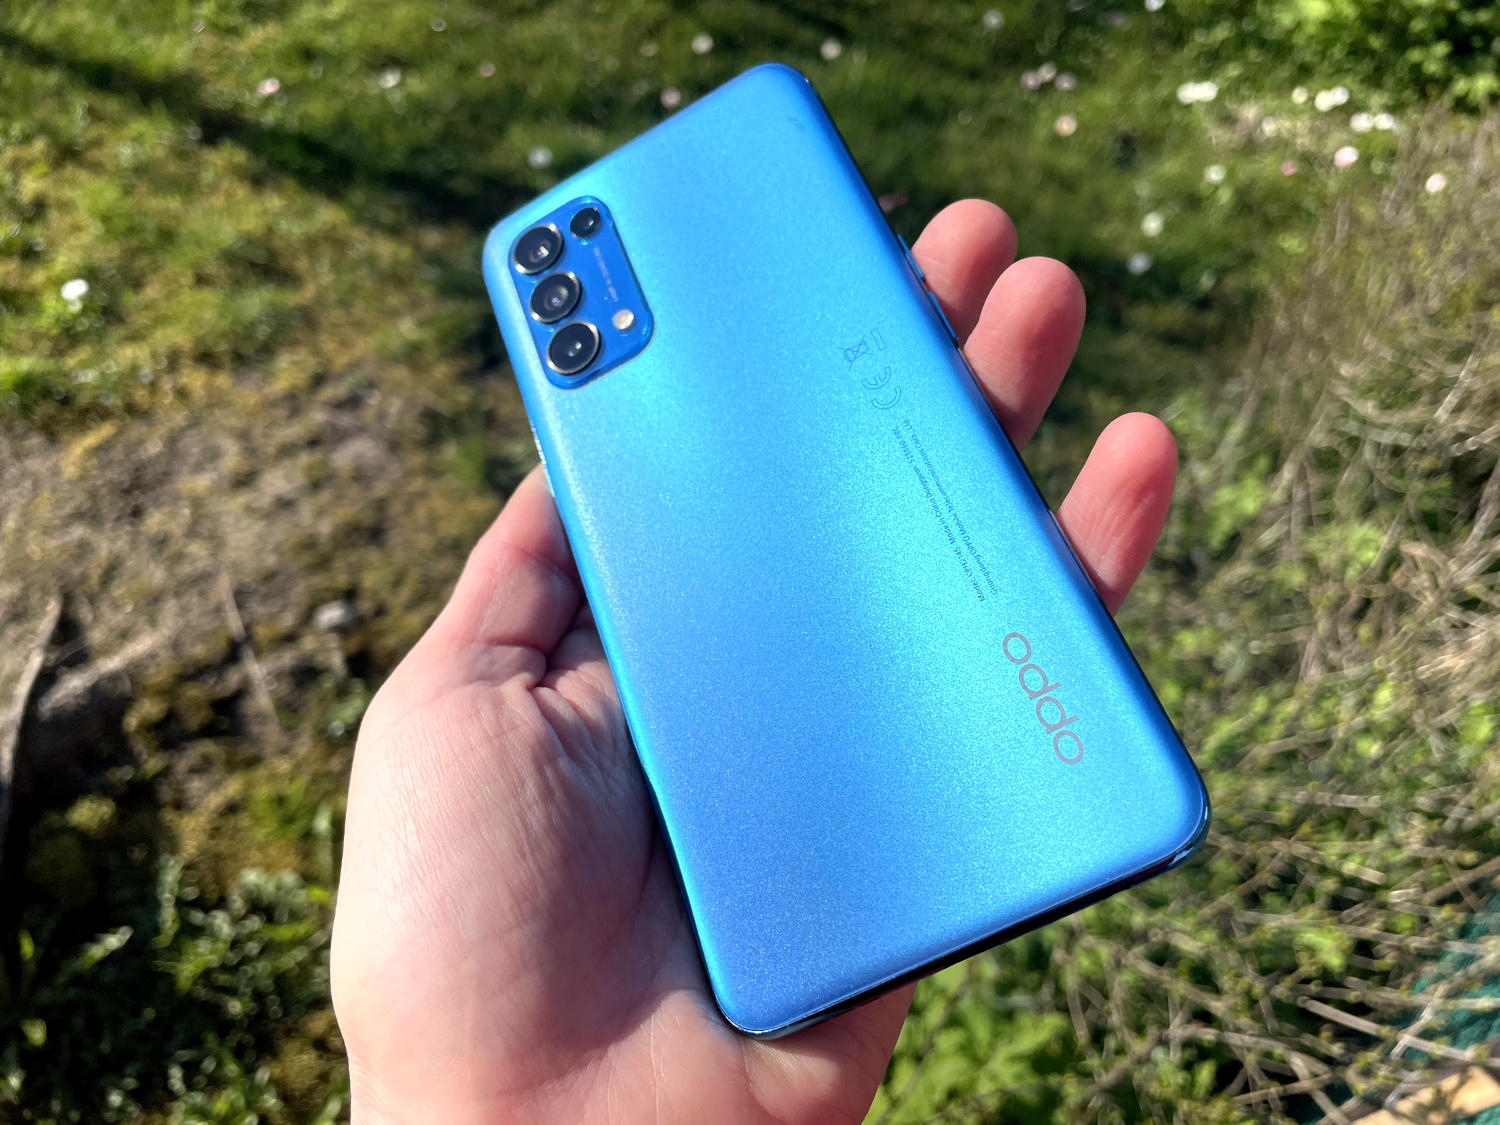 OPPO Reno5 5G review - Strong mid-ranger with 5G